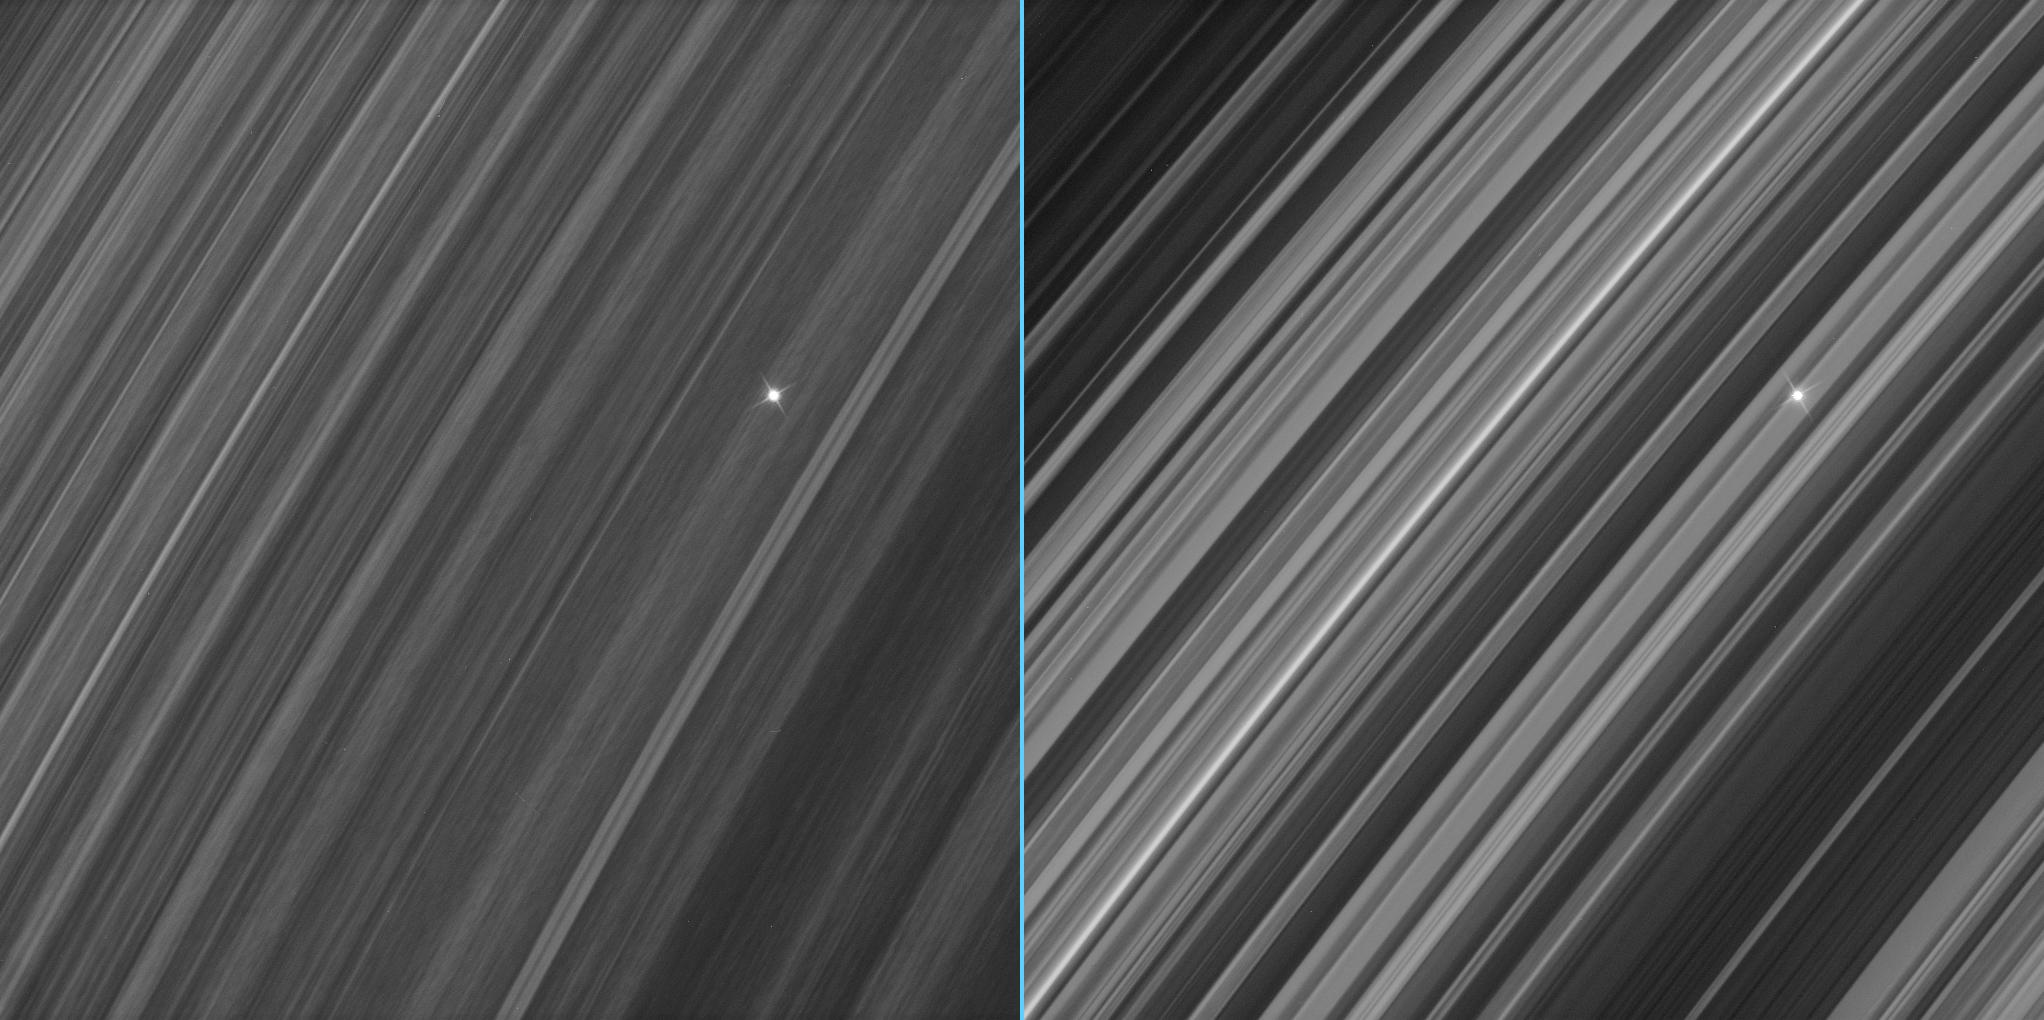 Side-by-side views of a star seen through Saturn's B ring